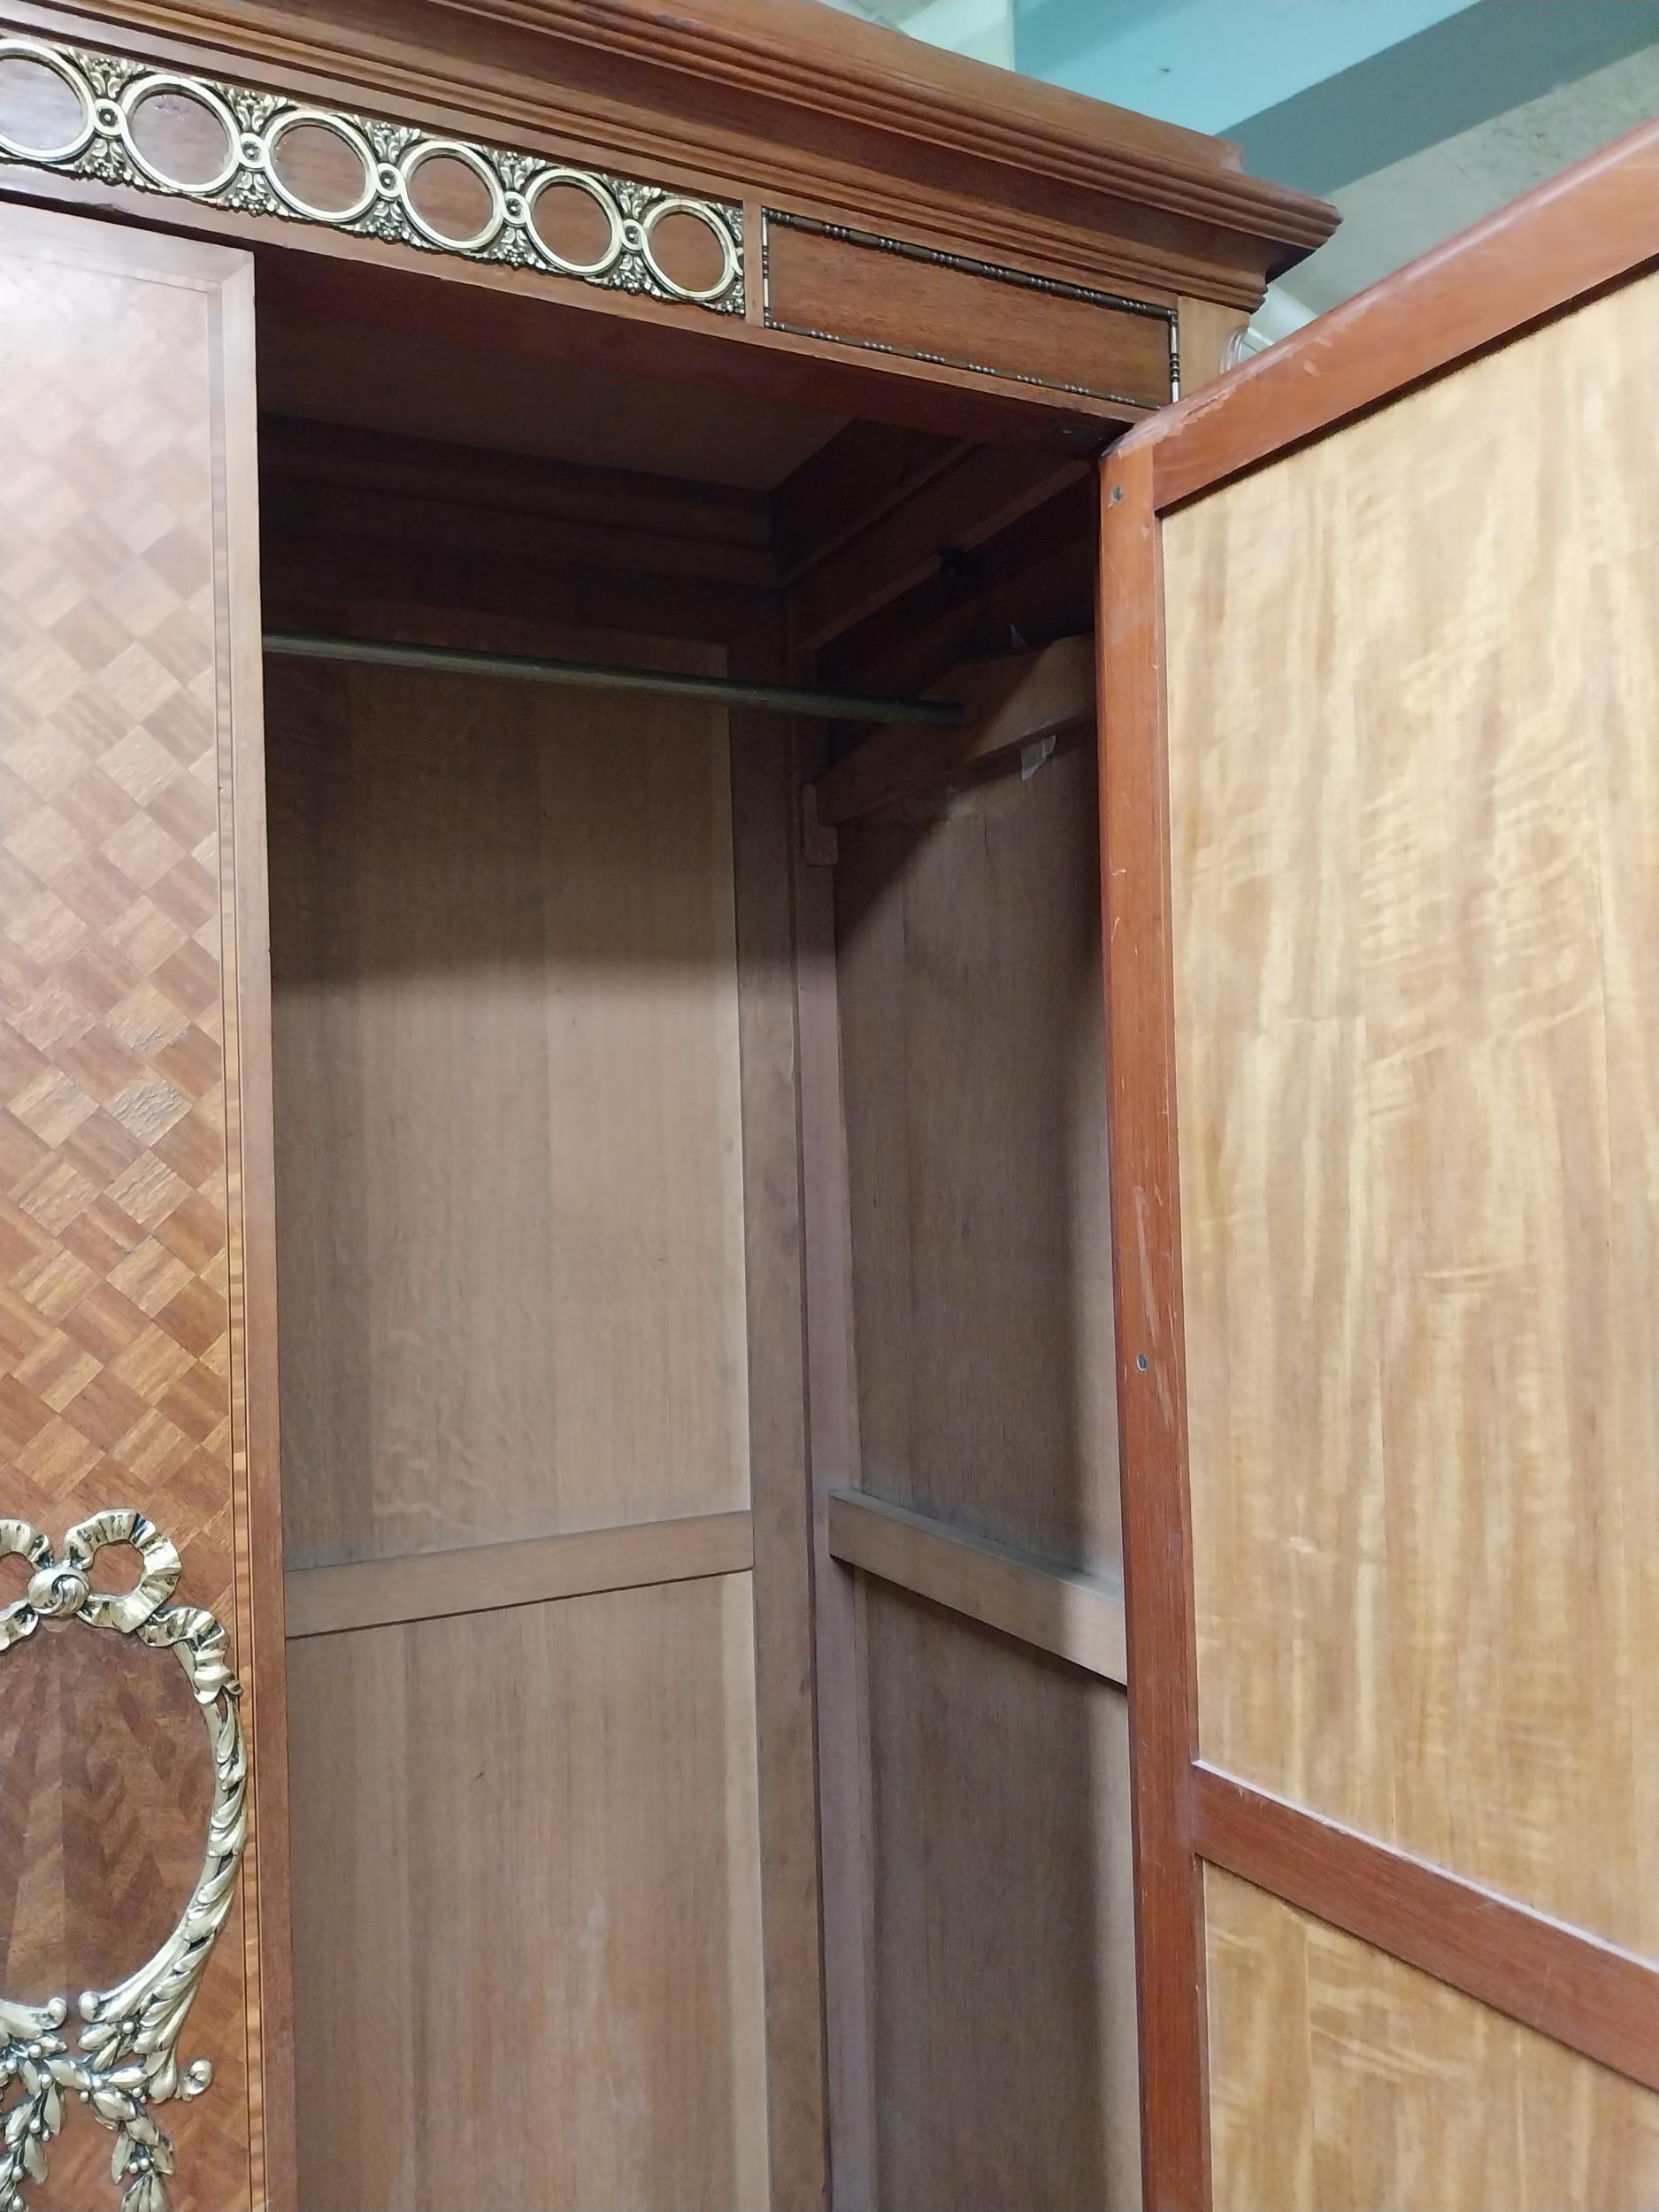 Good quality Edwardian Kingwood wardrobe with two mirrored doors over two drawers and ormolu mounted - Image 10 of 10